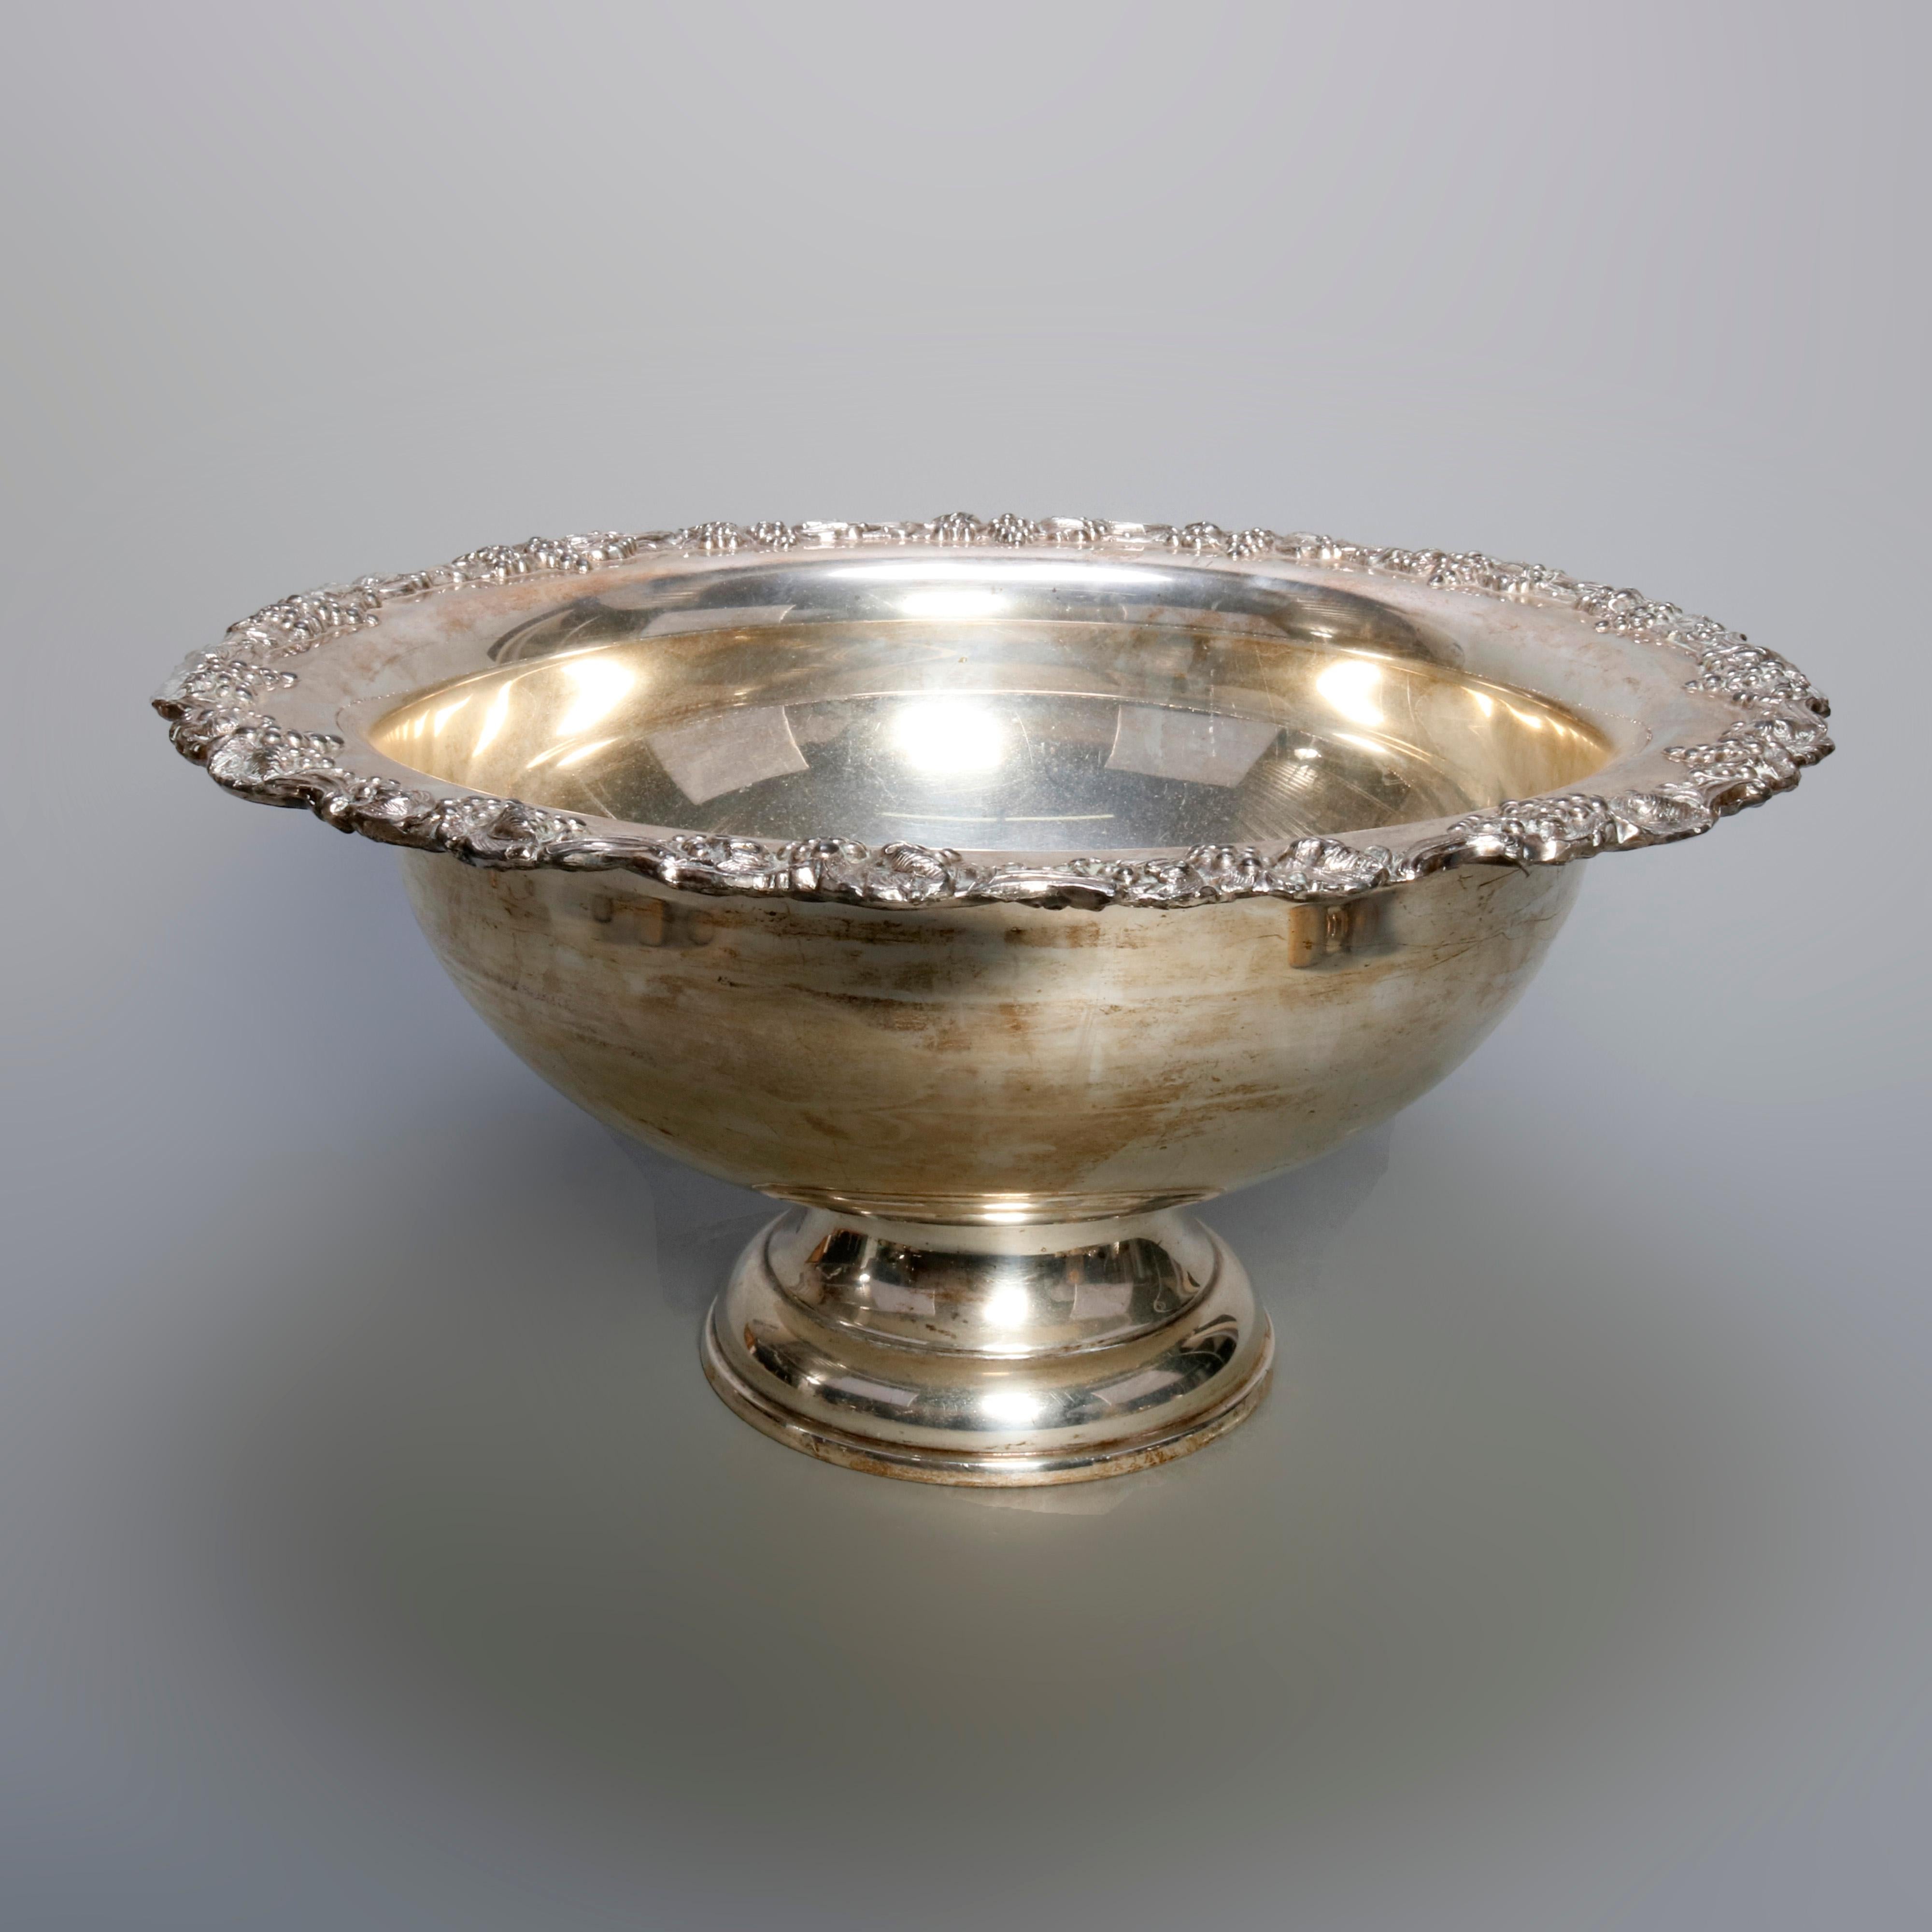 An antique silver plate punch bowl set includes bowl with grape and vine repousse bordering and pedestal base, 14 flared cups having scroll handles, and ladle, circa 1880

Measures: 9